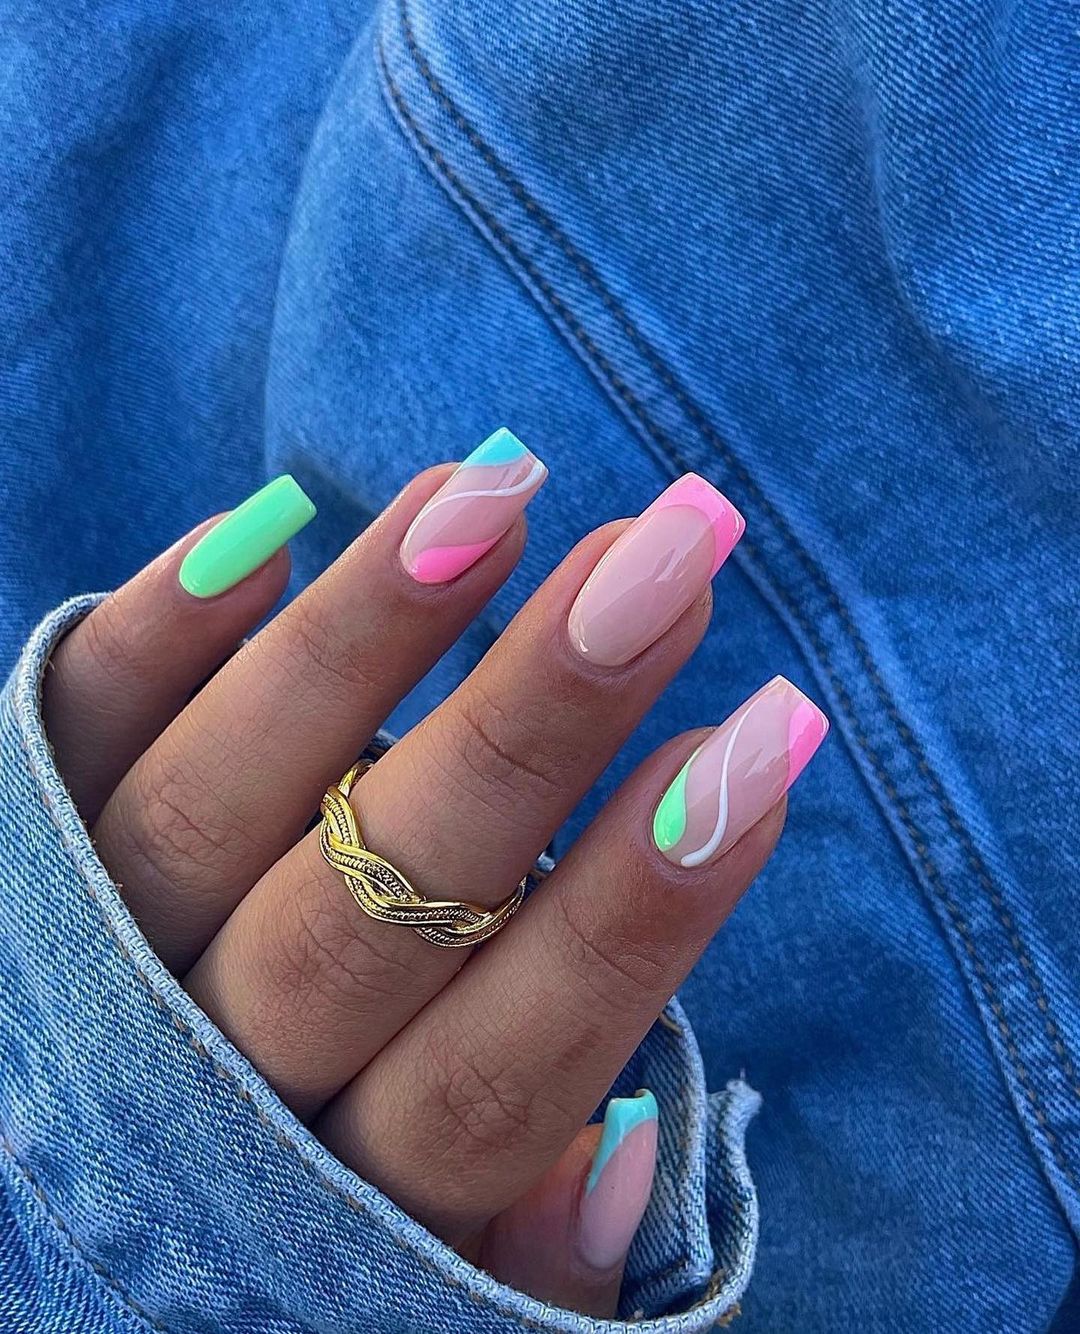 30 Best Nail Design Trends to Inspire You